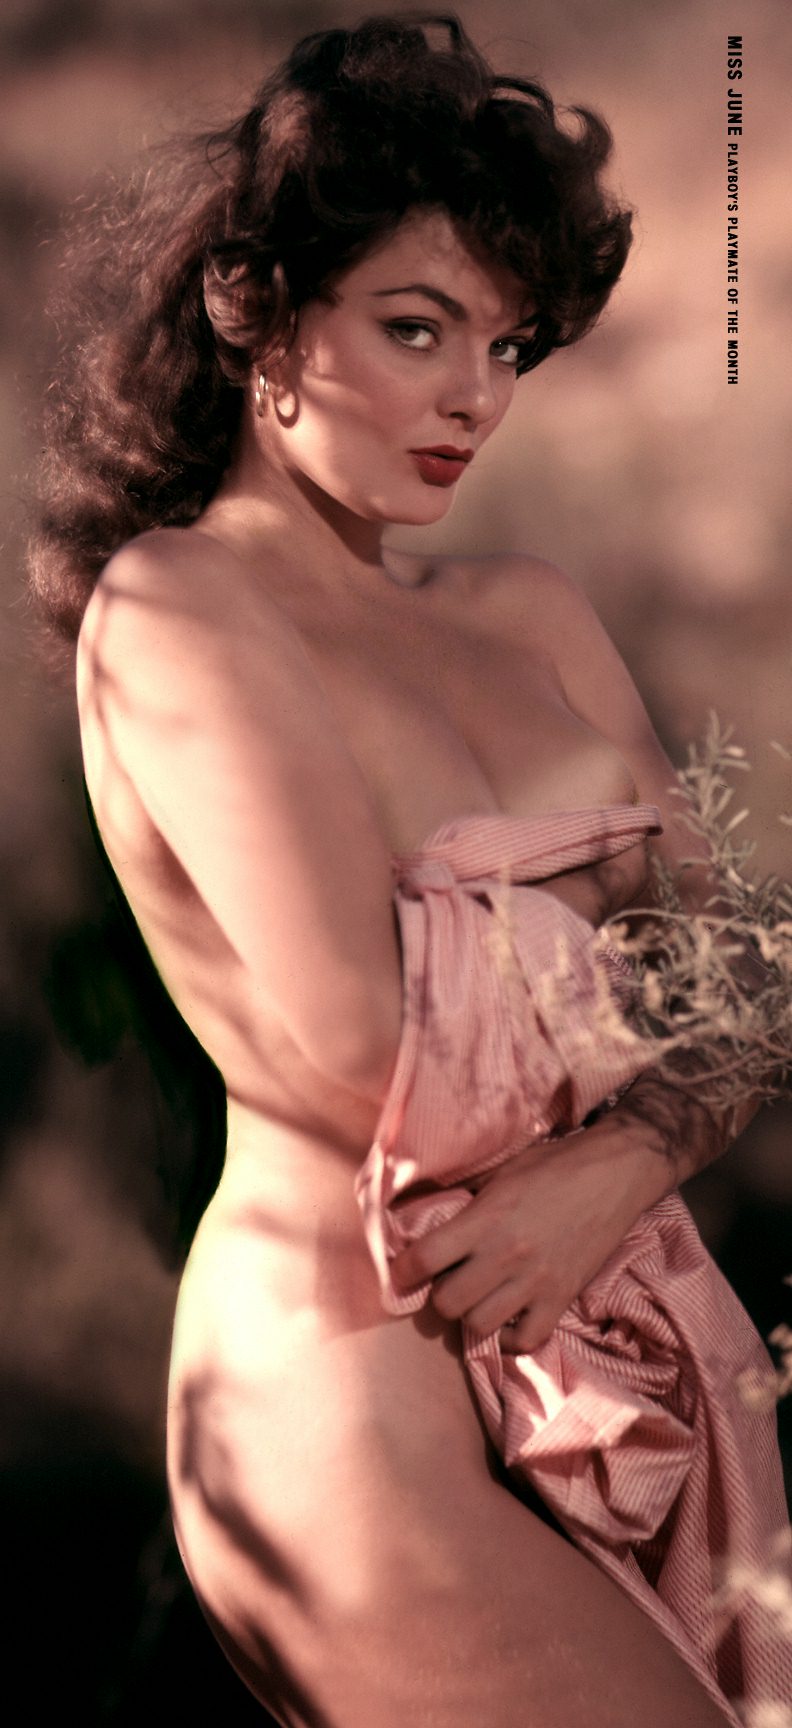  Playboy Playmate Of The Month1959.06.01 Marilyn Hanold 